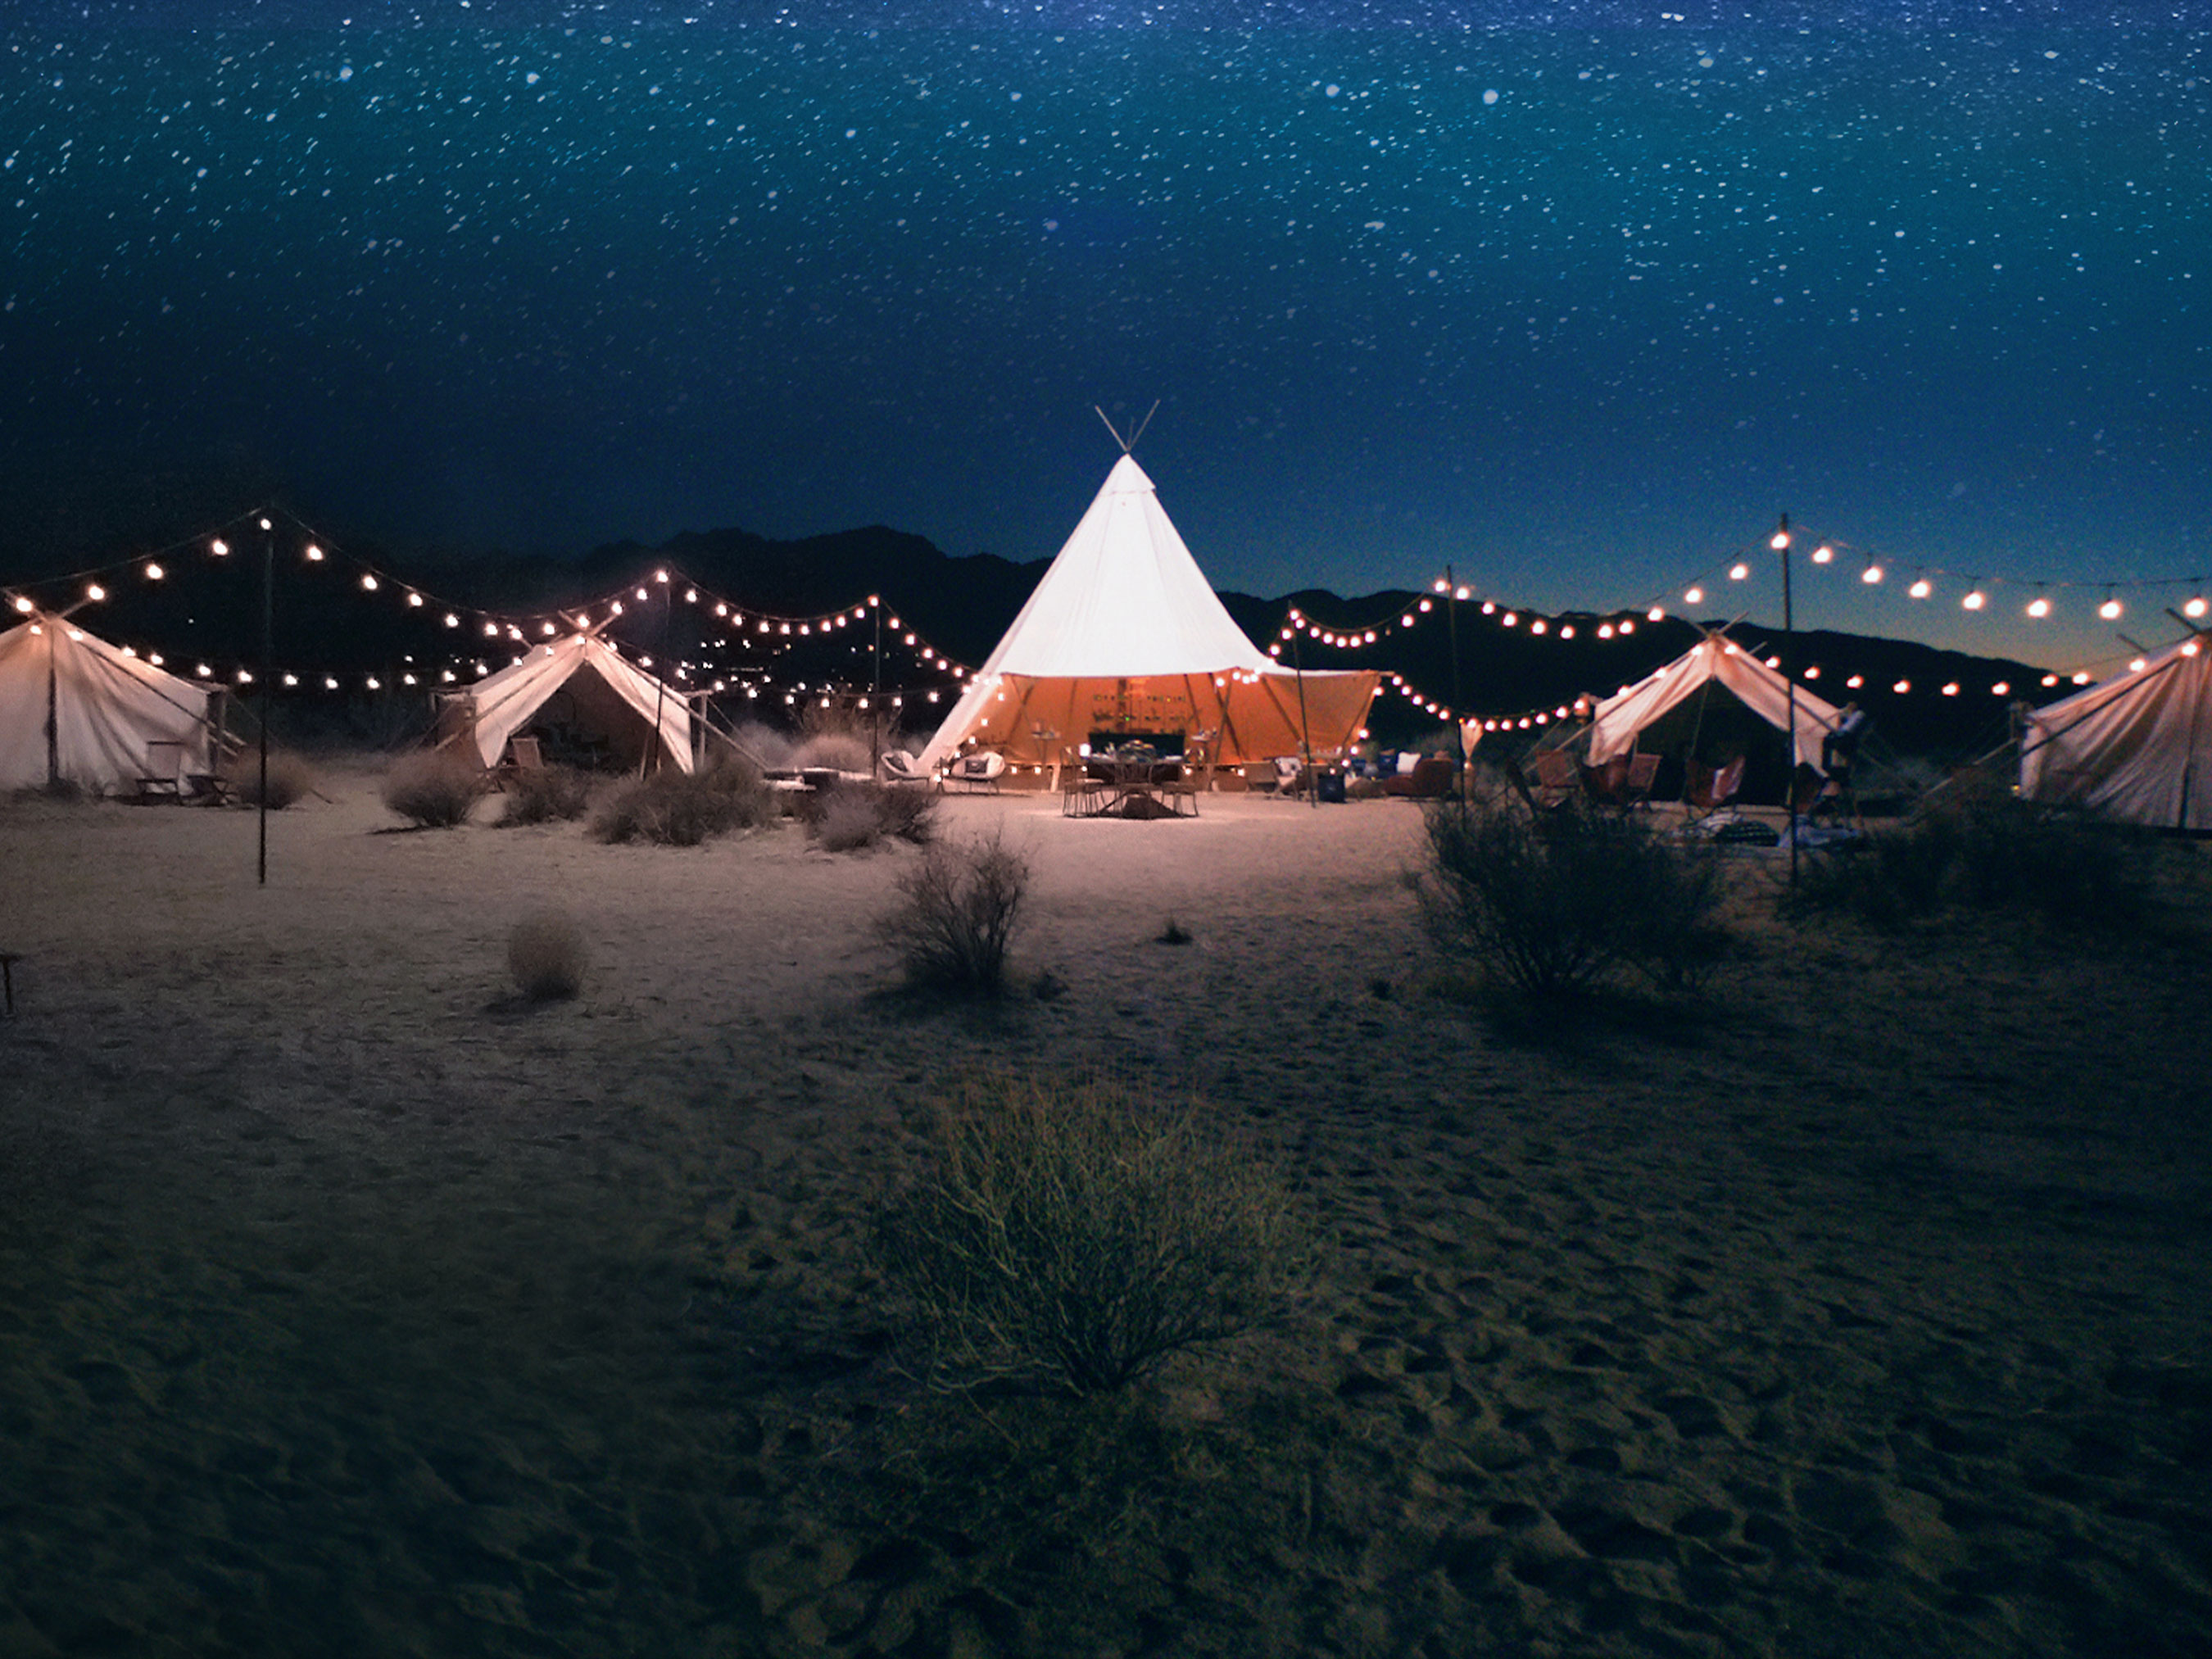 As the embodiment of Astral Tequila, The House of Astral sits under wide-open desert skies just outside of Joshua Tree National Park as a new-to-world celestial getaway like no other – a destination where you can fully immerse yourself in the good energy that only the sun and stars bring.